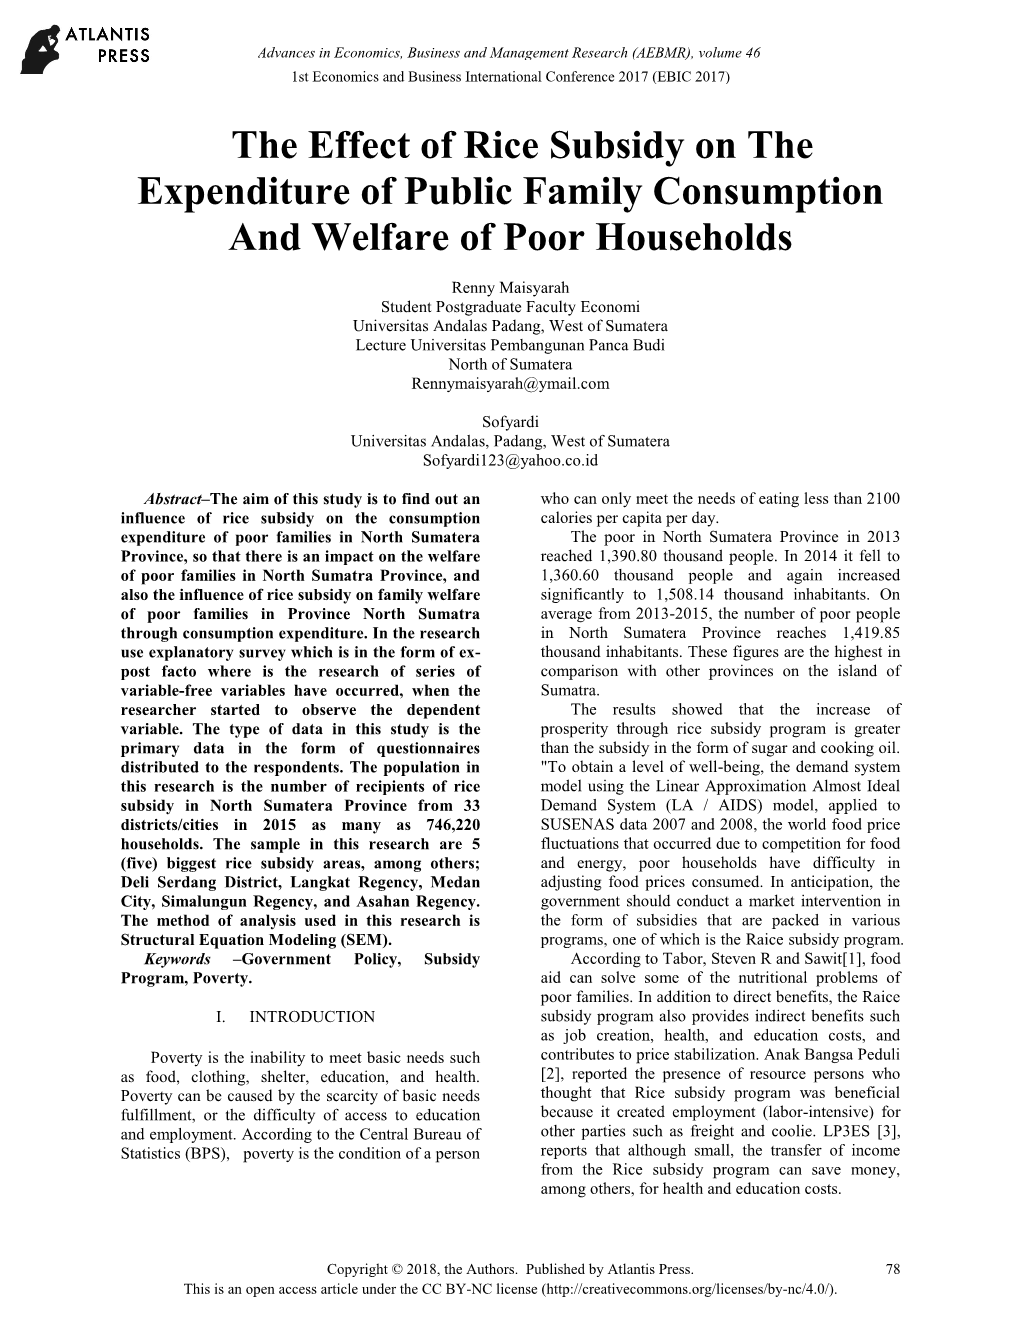 The Effect of Rice Subsidy on the Expenditure of Public Family Consumption and Welfare of Poor Households